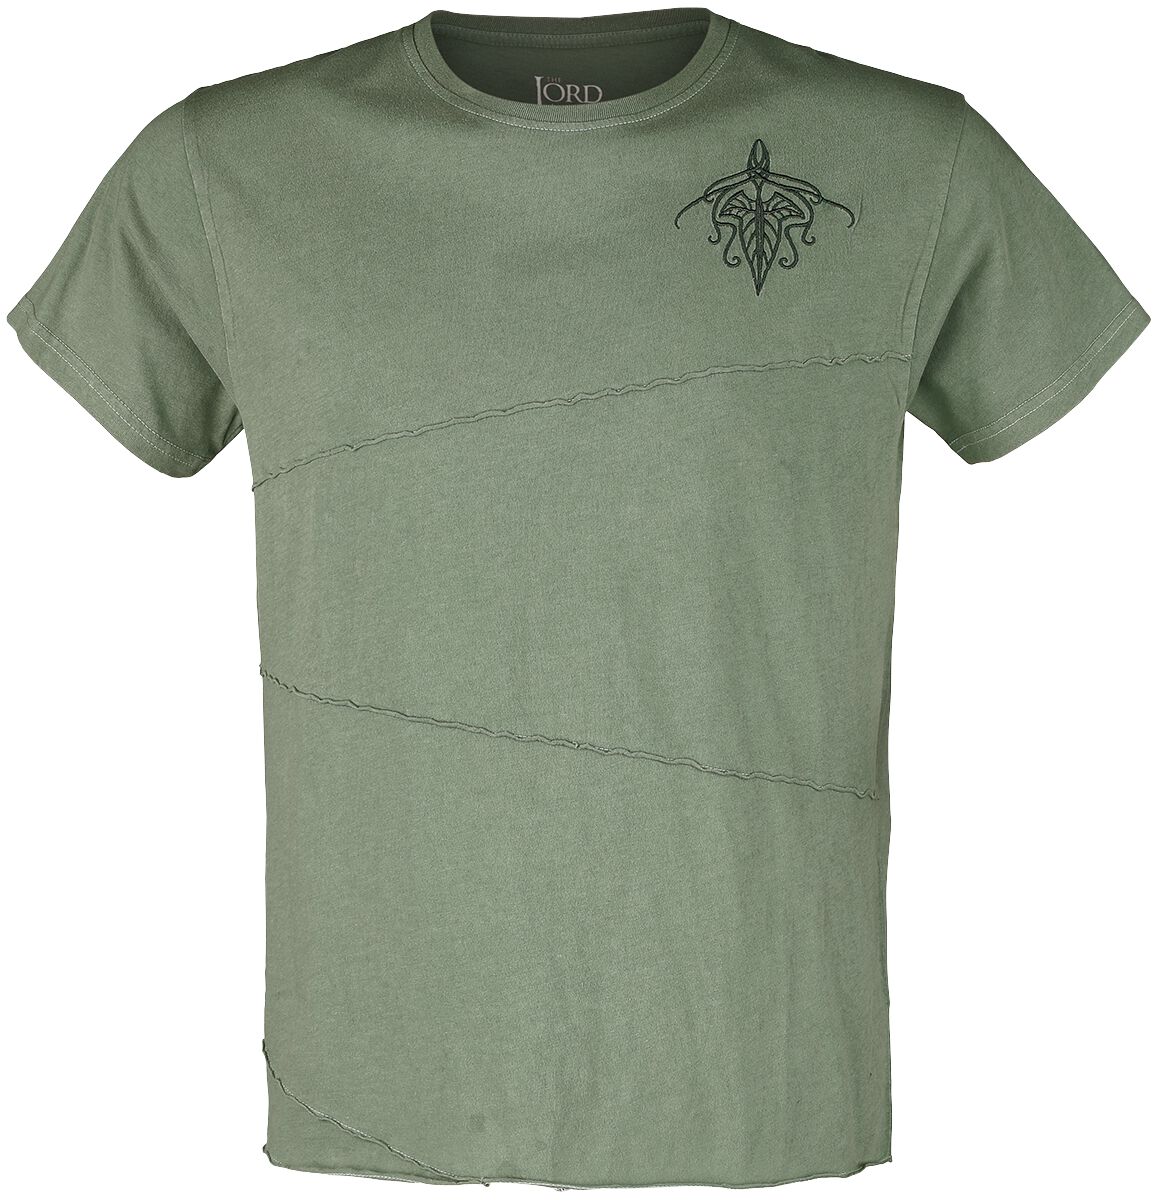 The Lord Of The Rings Galadrim T-Shirt green